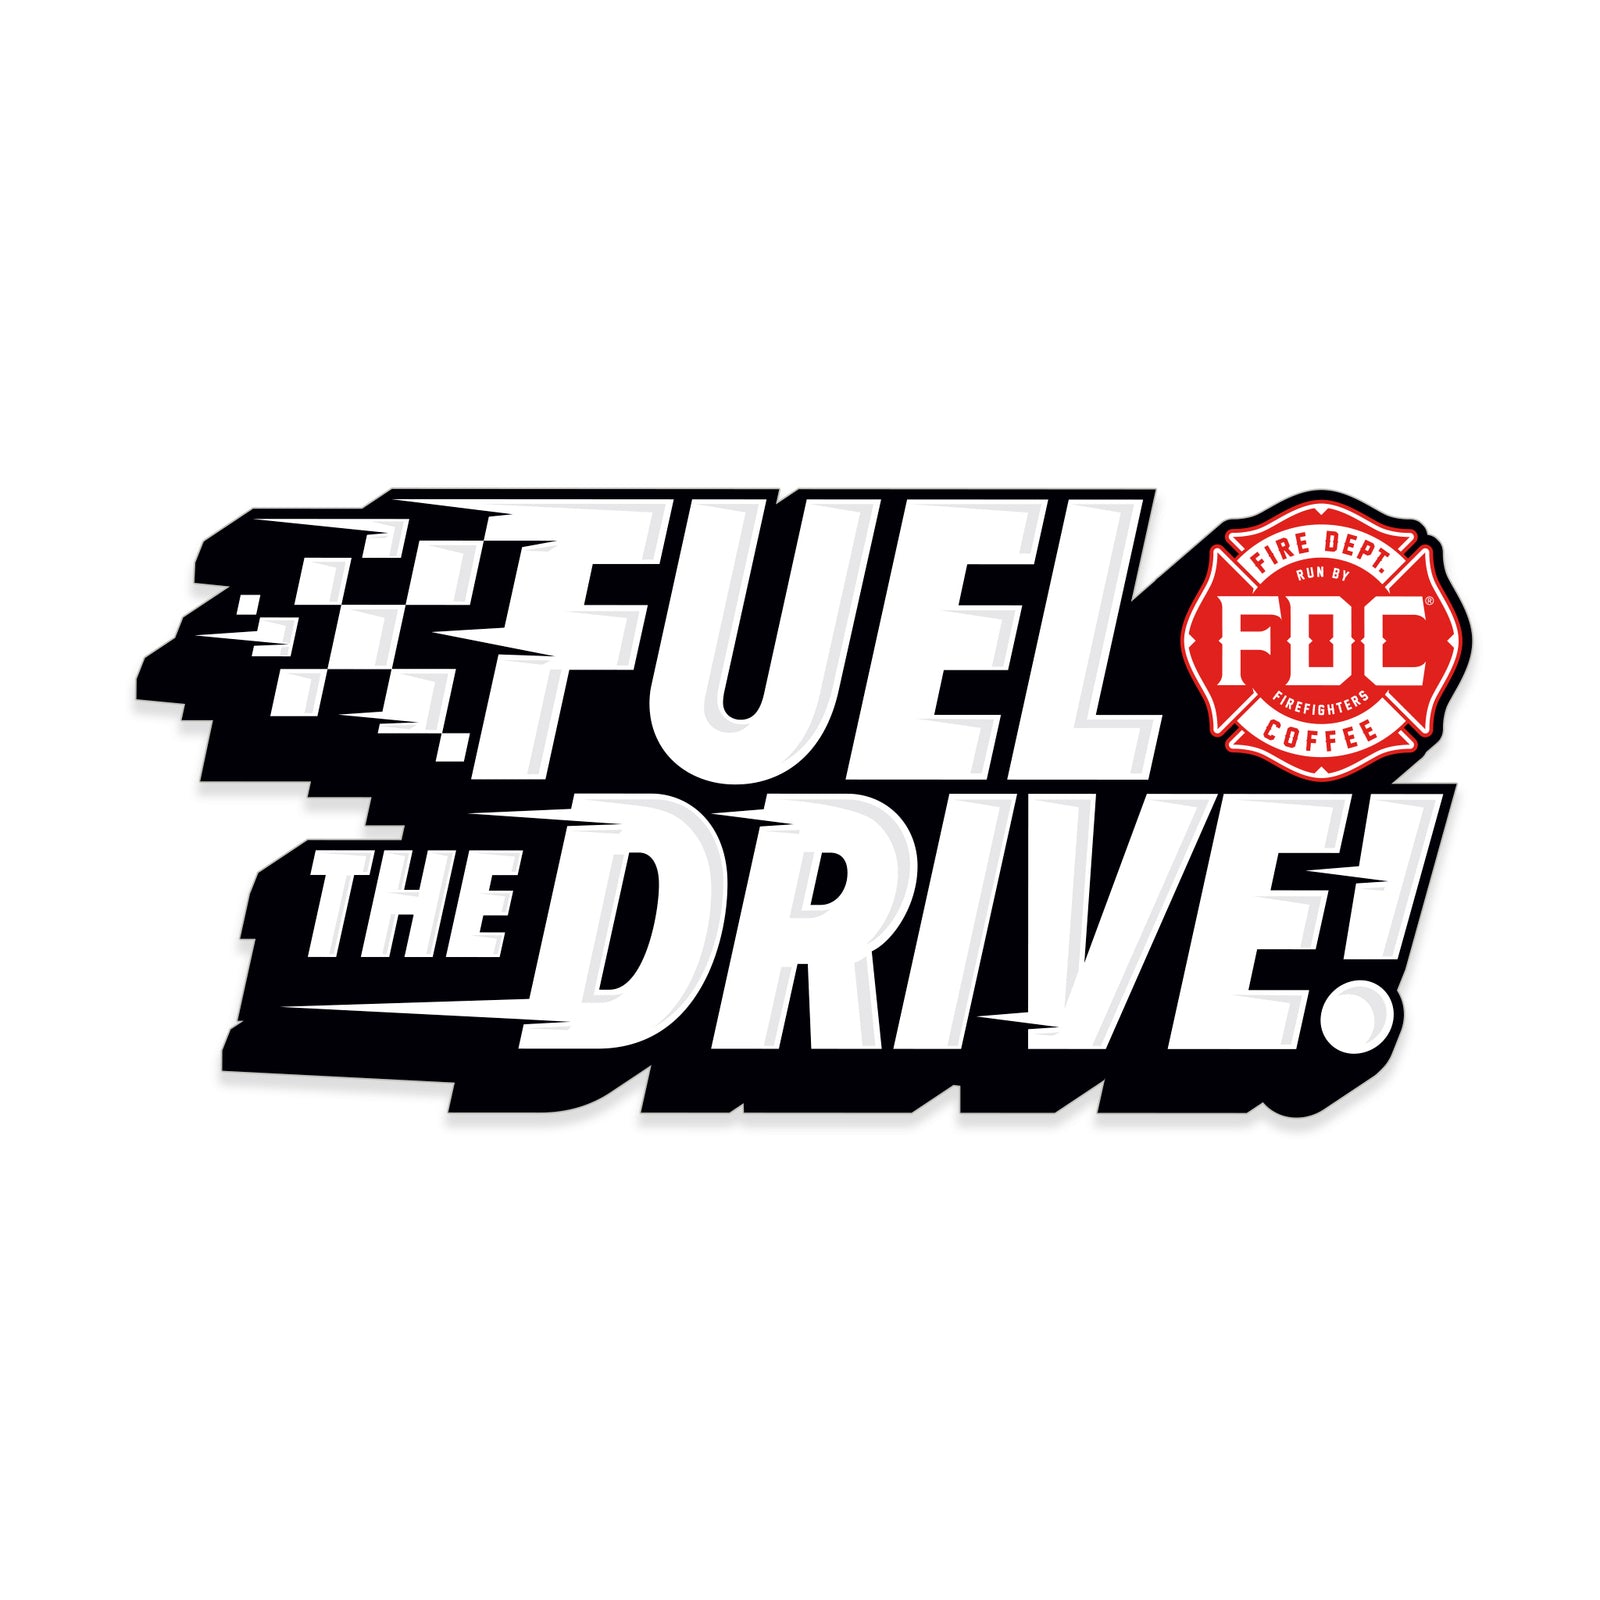 A checkered flag design with white text that reads FUEL THE DRIVE featuring the red FDC maltese cross logo